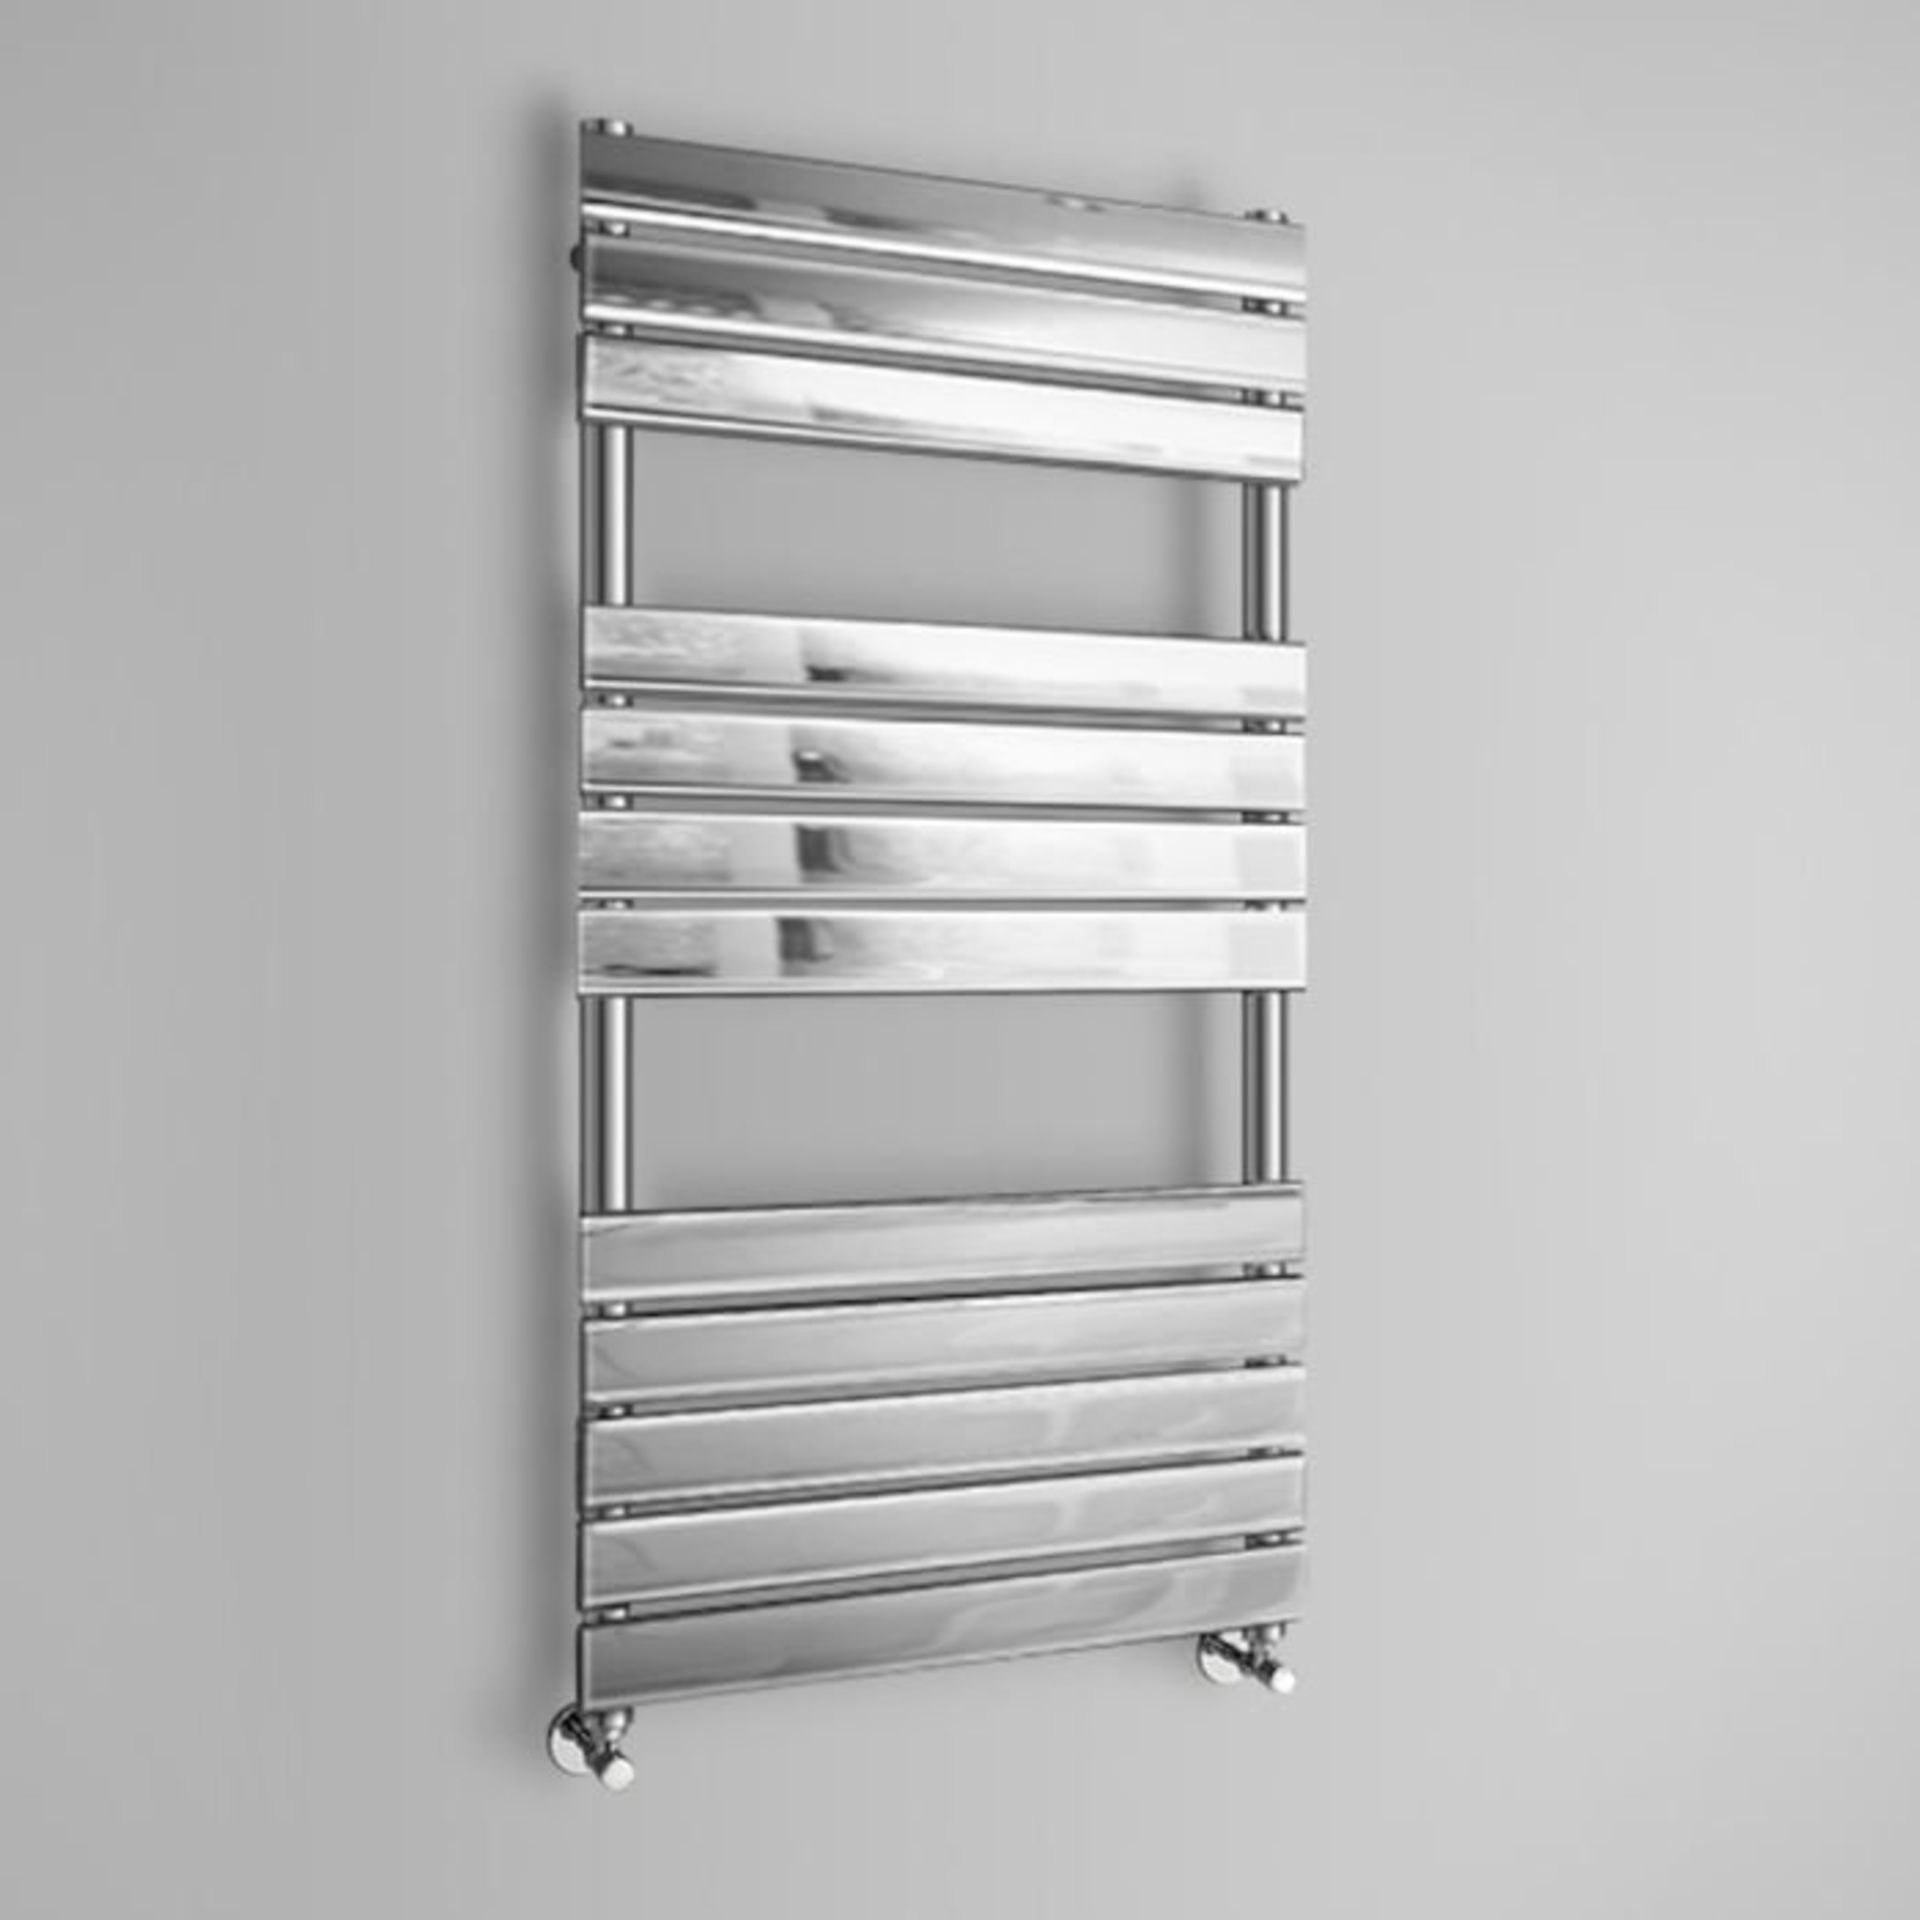 (H49) 1200x600mm Chrome Flat Panel Ladder Towel Radiator RRP £379.99 Low carbon steel chrome - Image 3 of 3